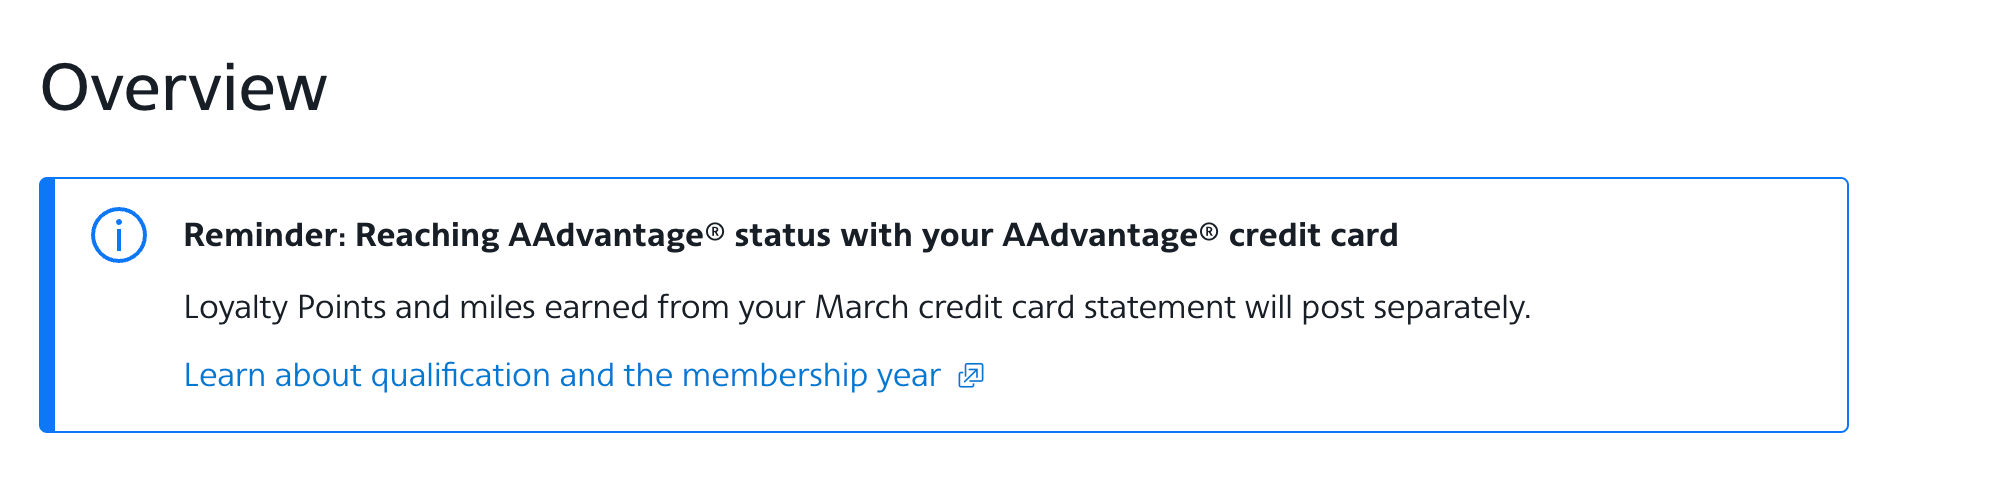 AAdvantage notification. AMERICAN AIRLINES